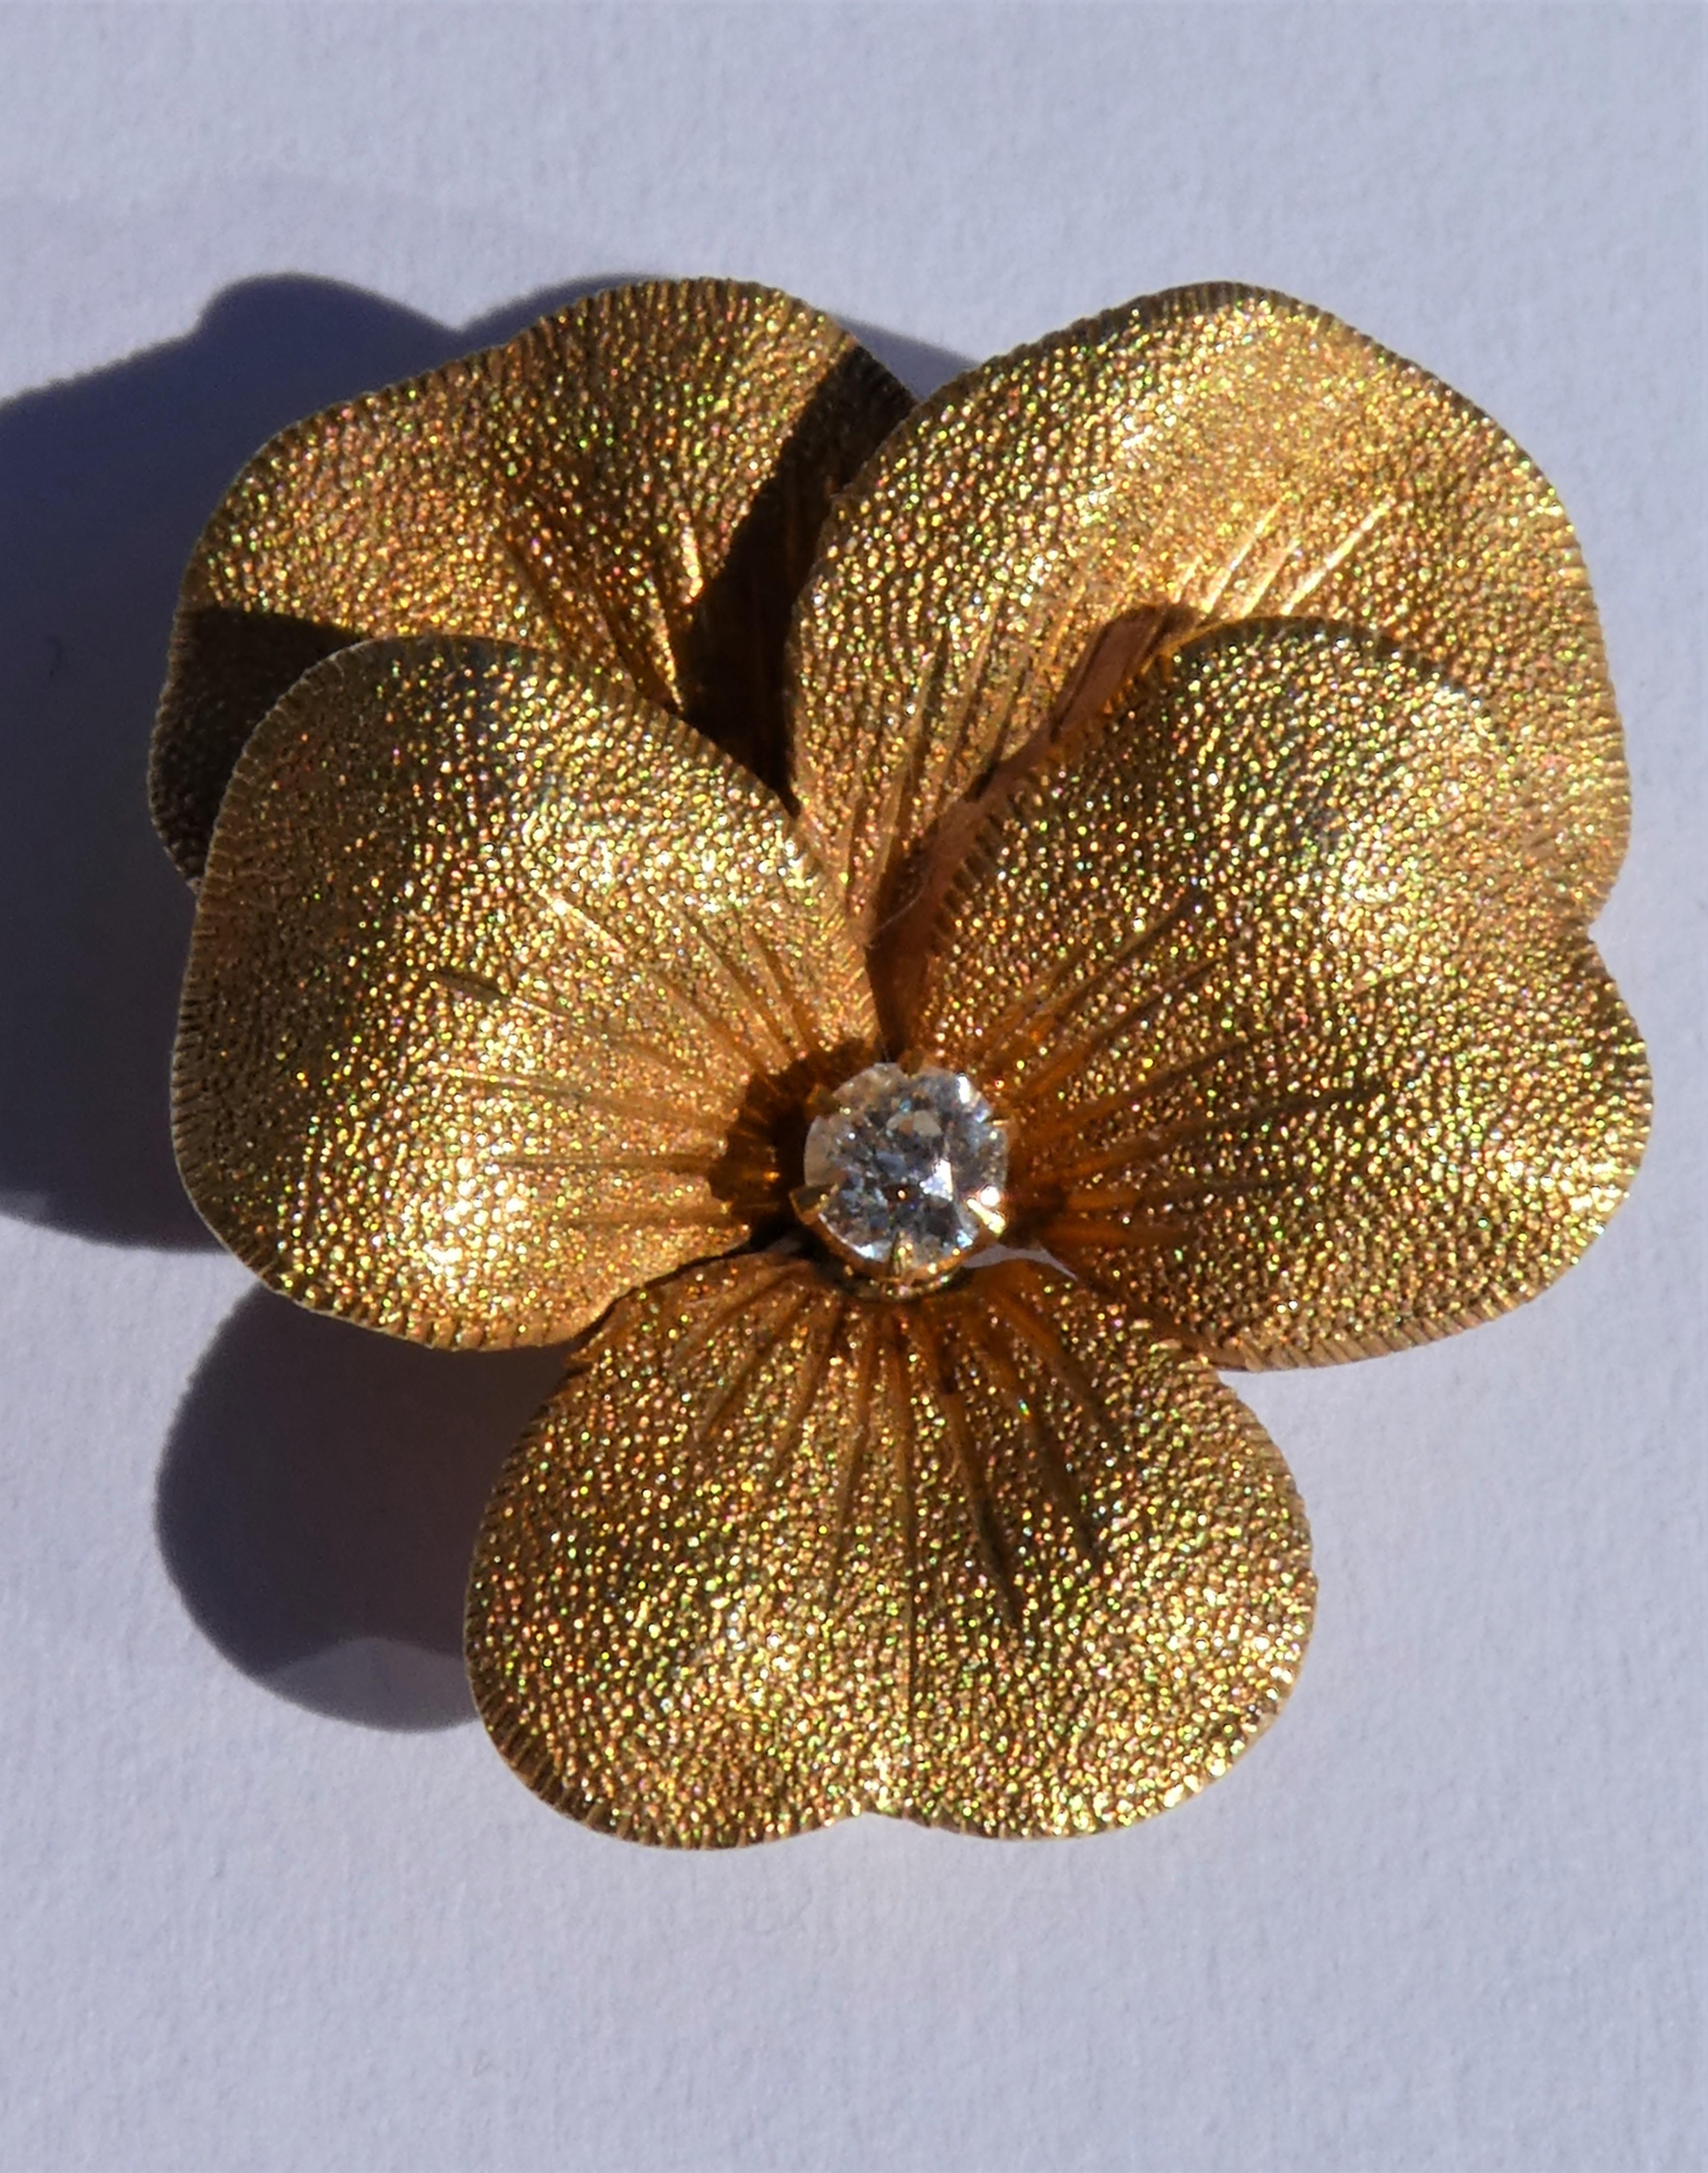 This pretty brooch was crafted circa 1900 in the United States in 14 karat yellow gold. The gold surface is textured and brushed and has a lovely shine. It shows the gold veins in the petals nicely. In the center there is a round old European Cut